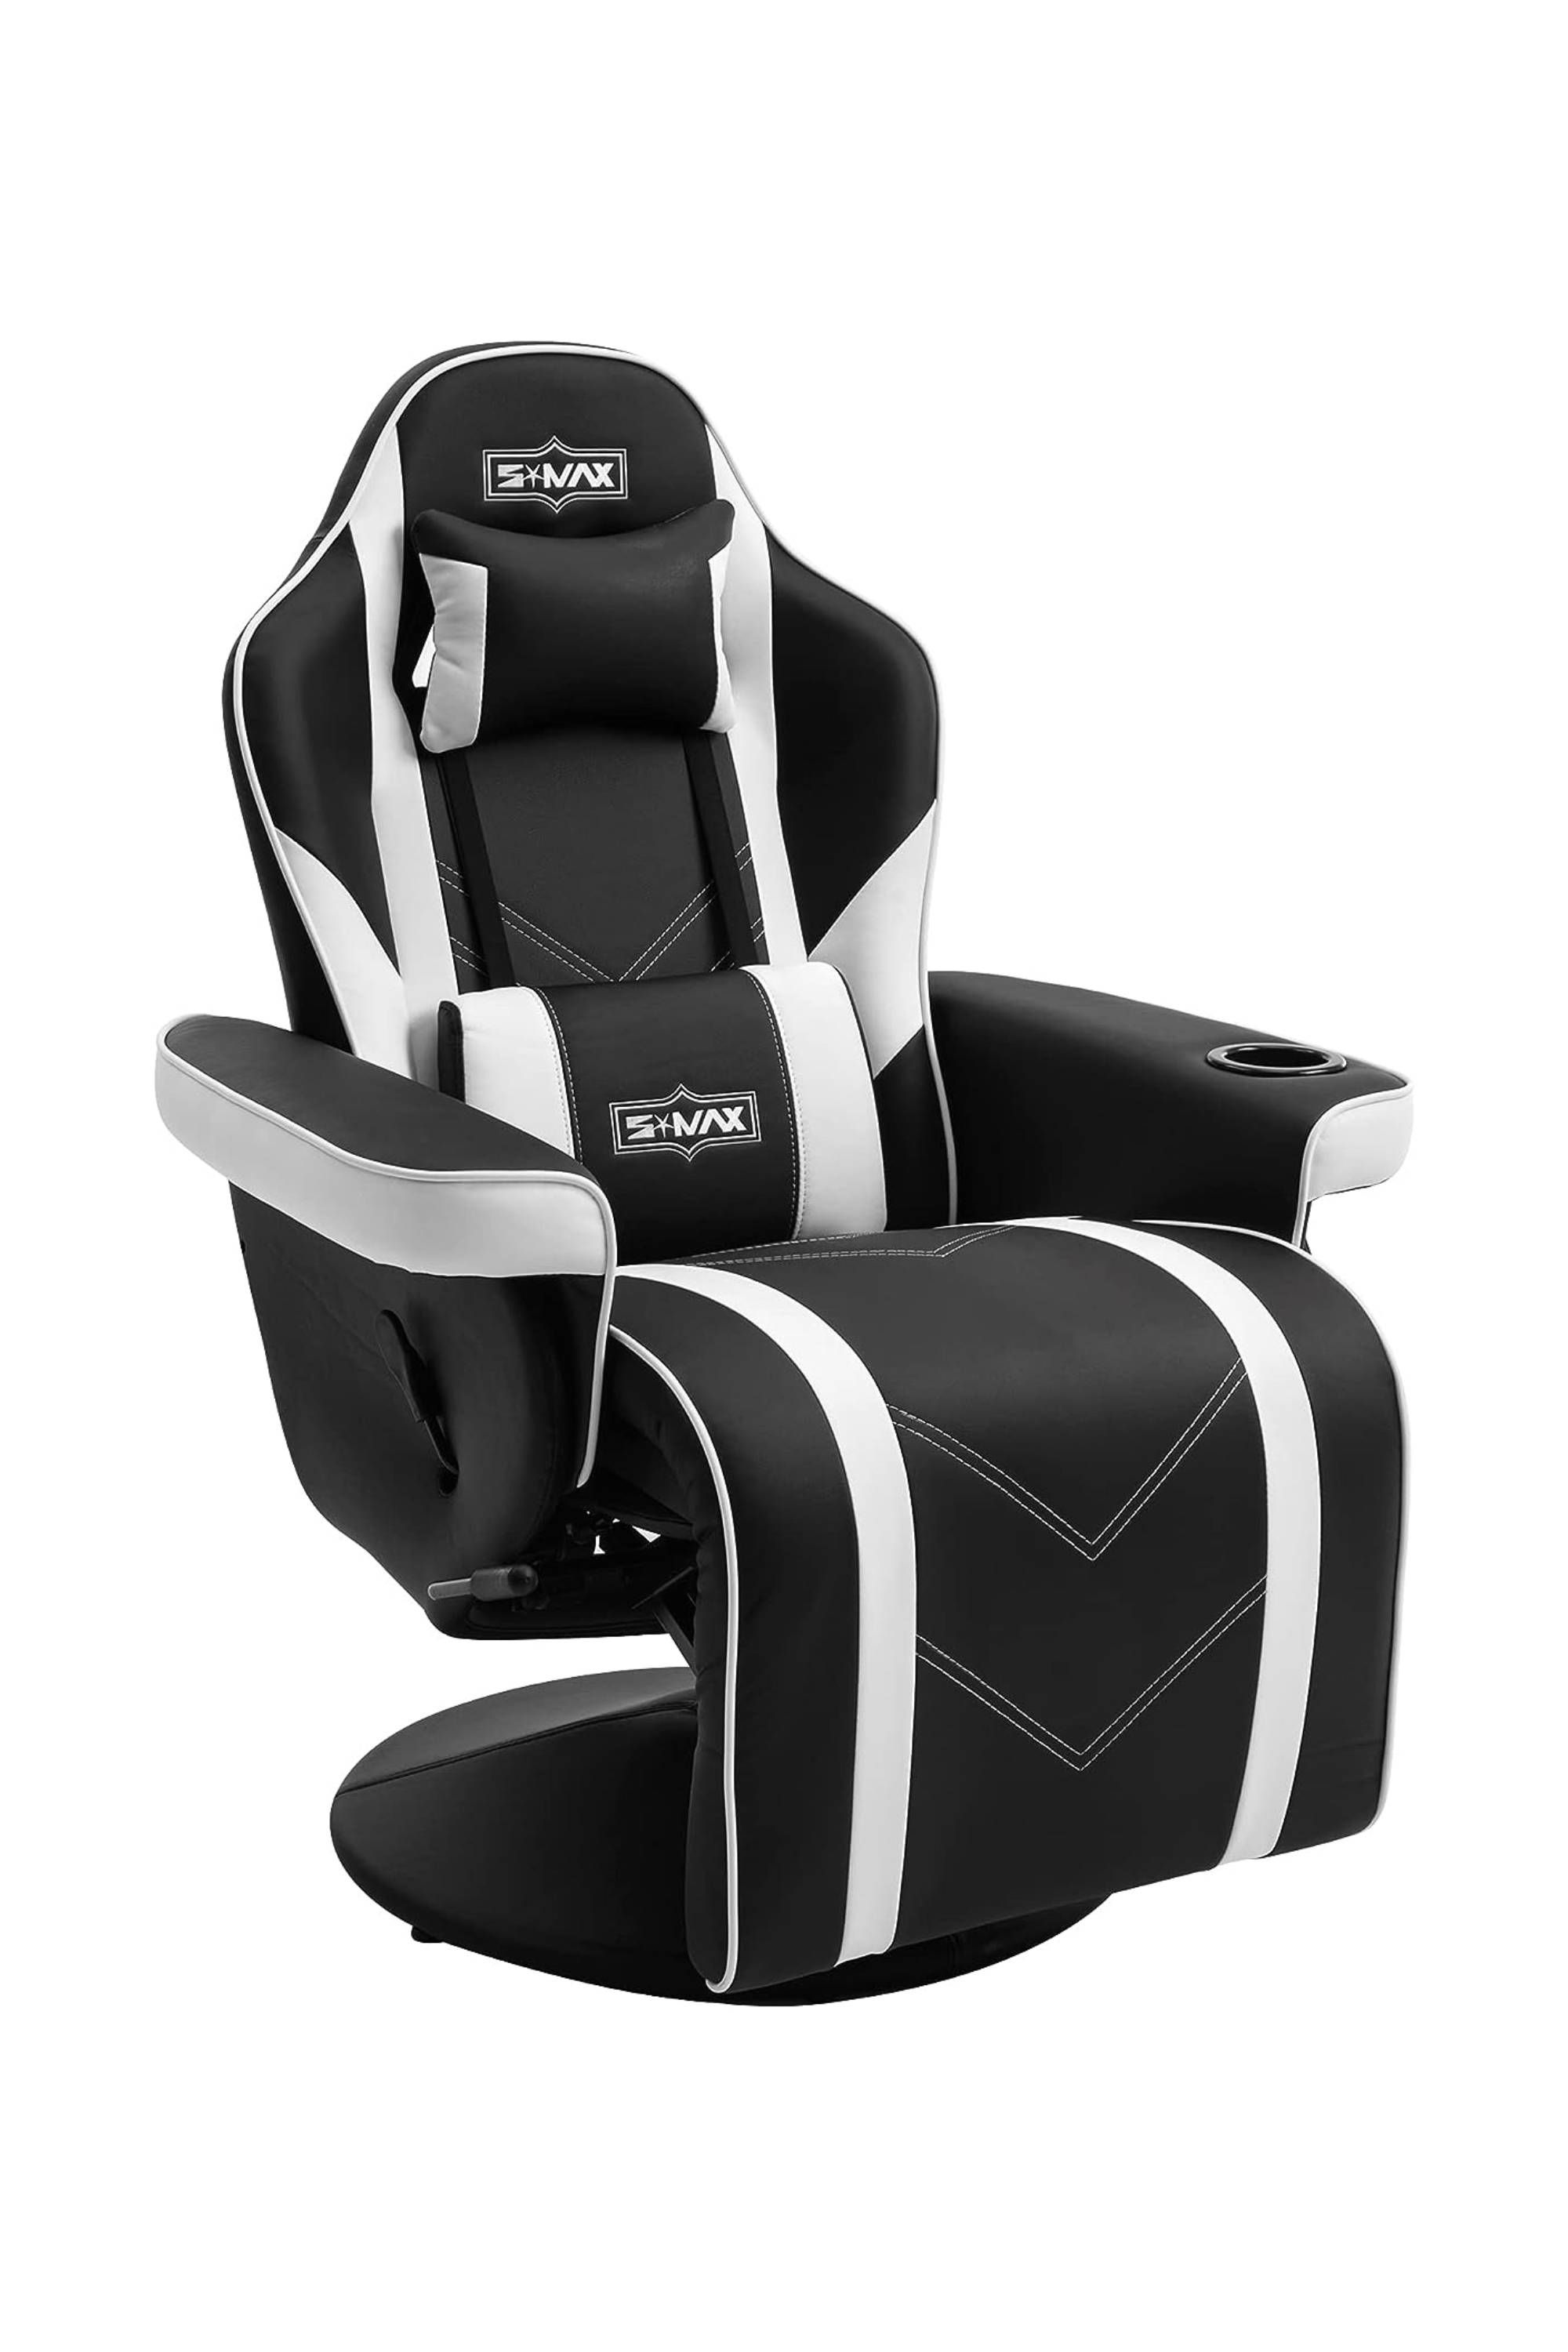 S_MAX Gaming Recliner Chair